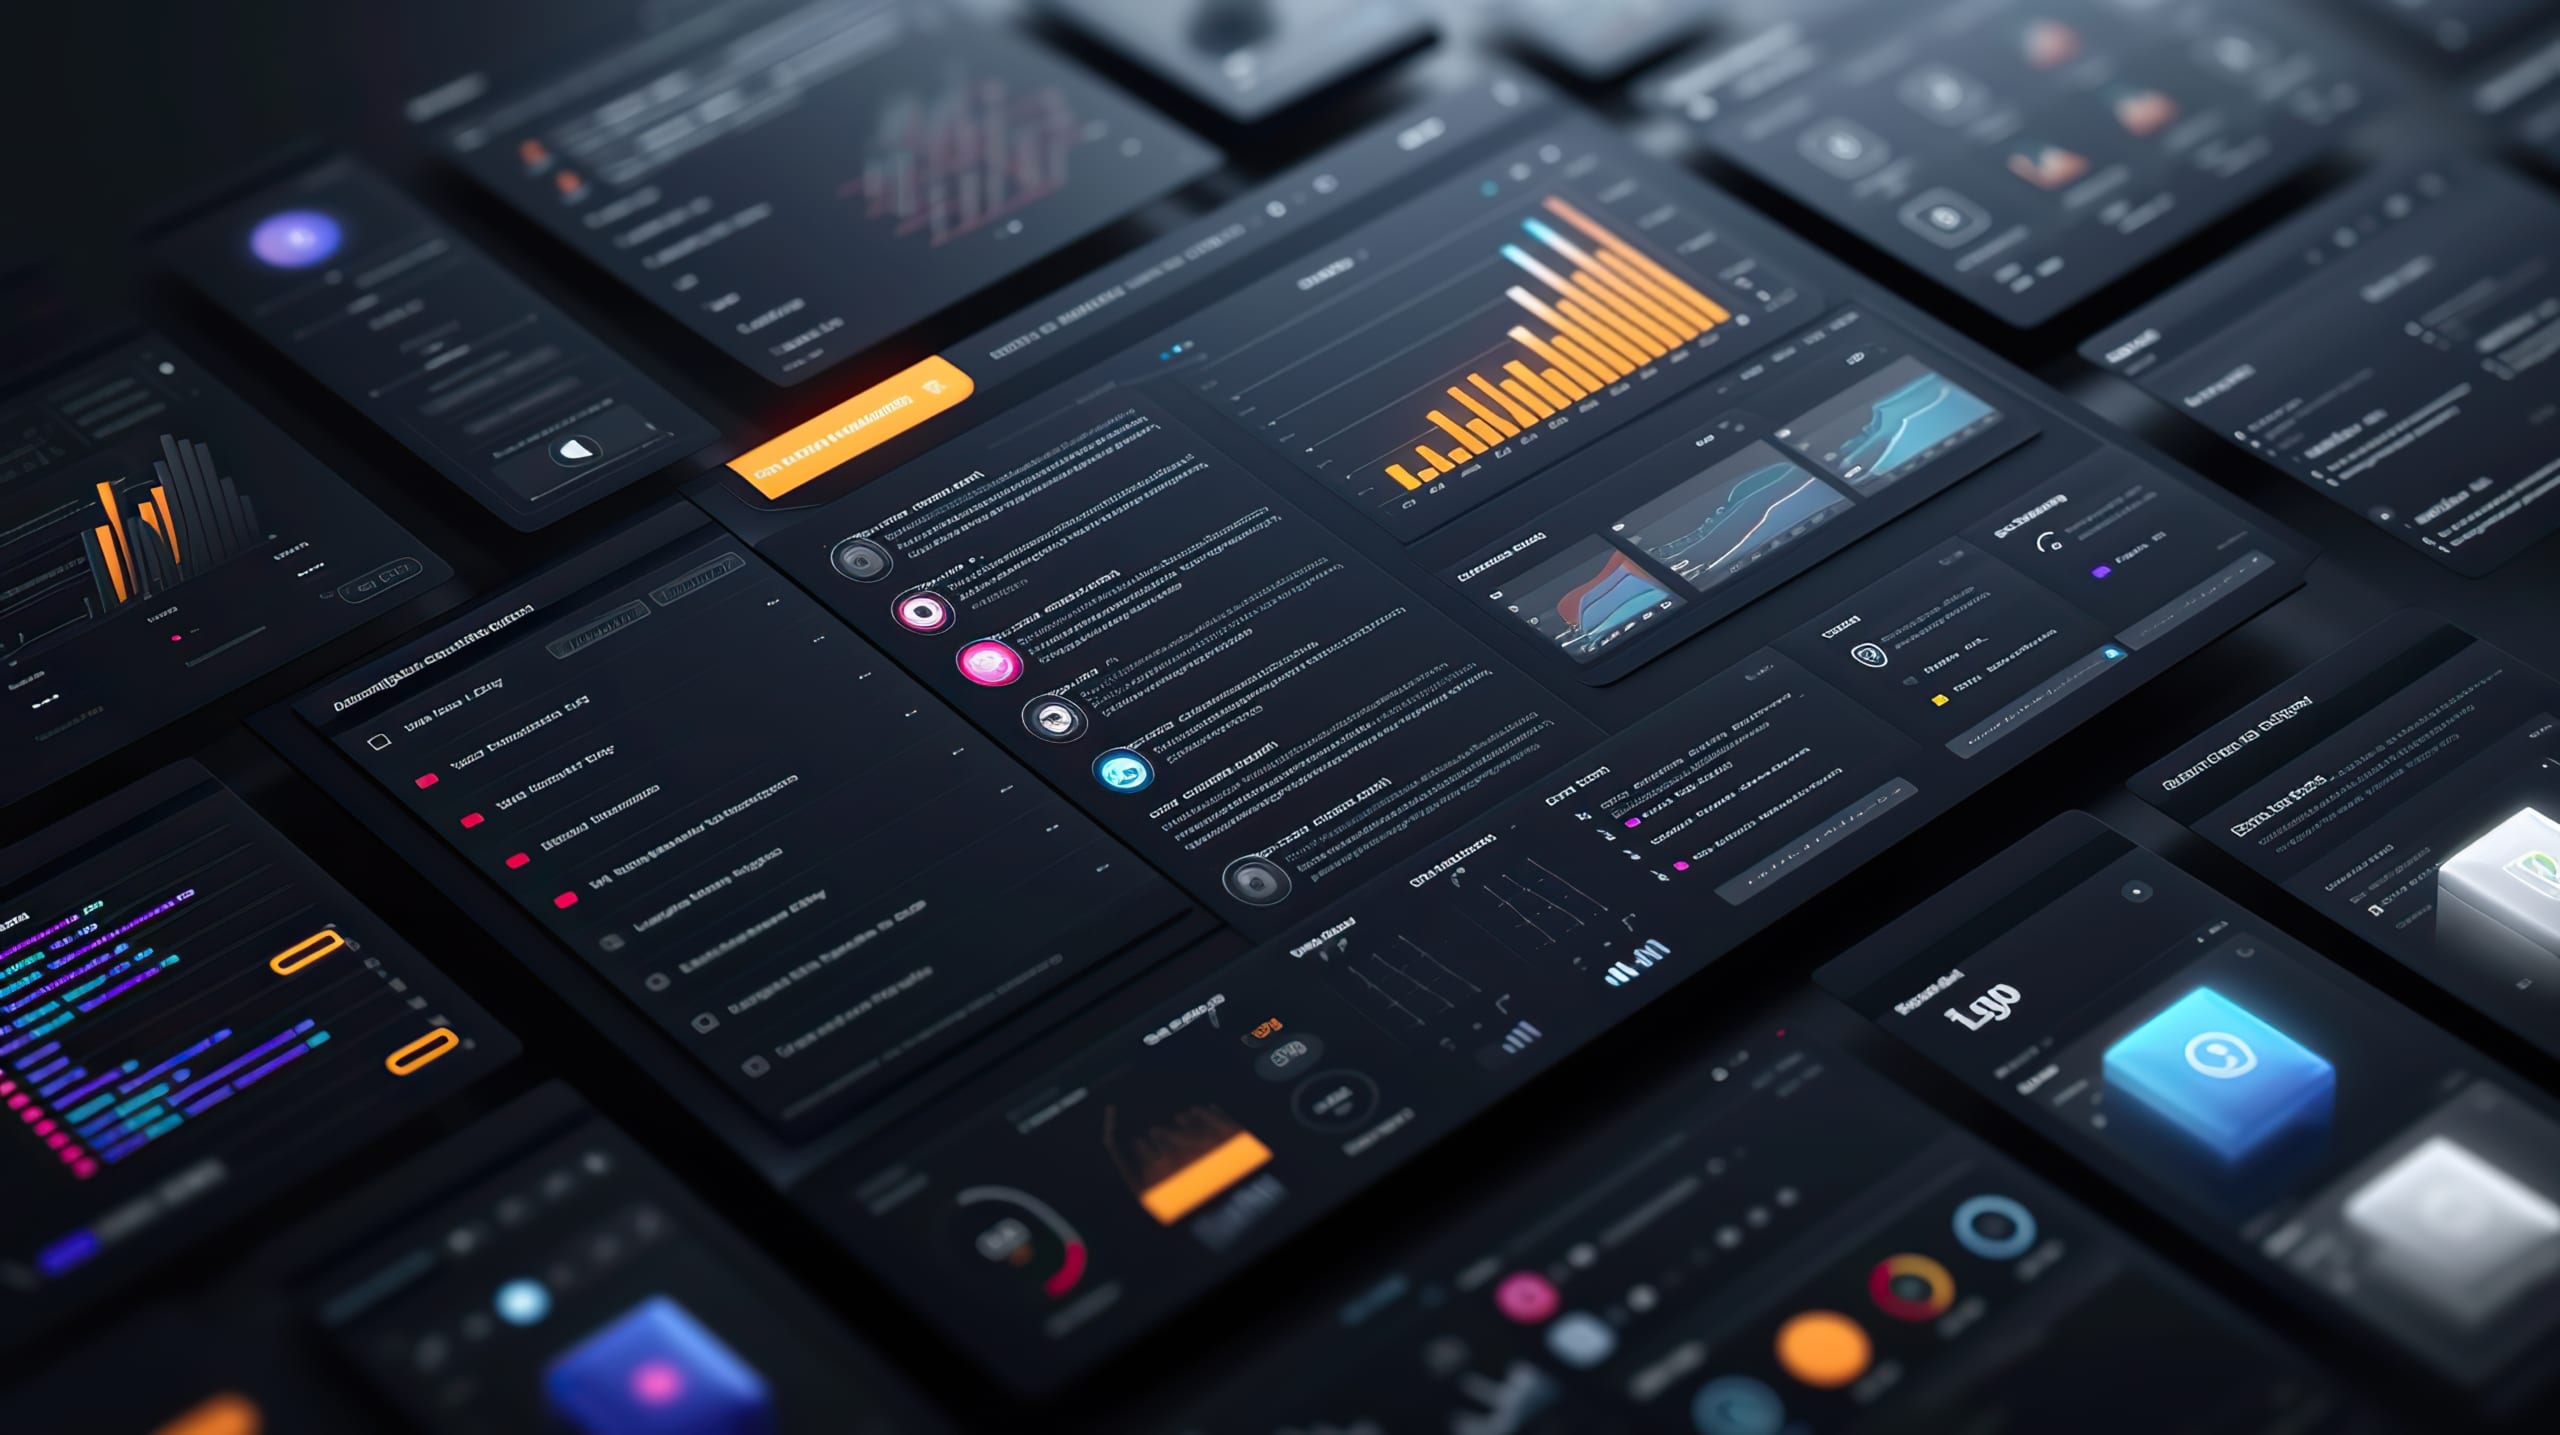 A collection of sophisticated user interface screens displaying analytics and data visualization in a sleek, dark mode theme